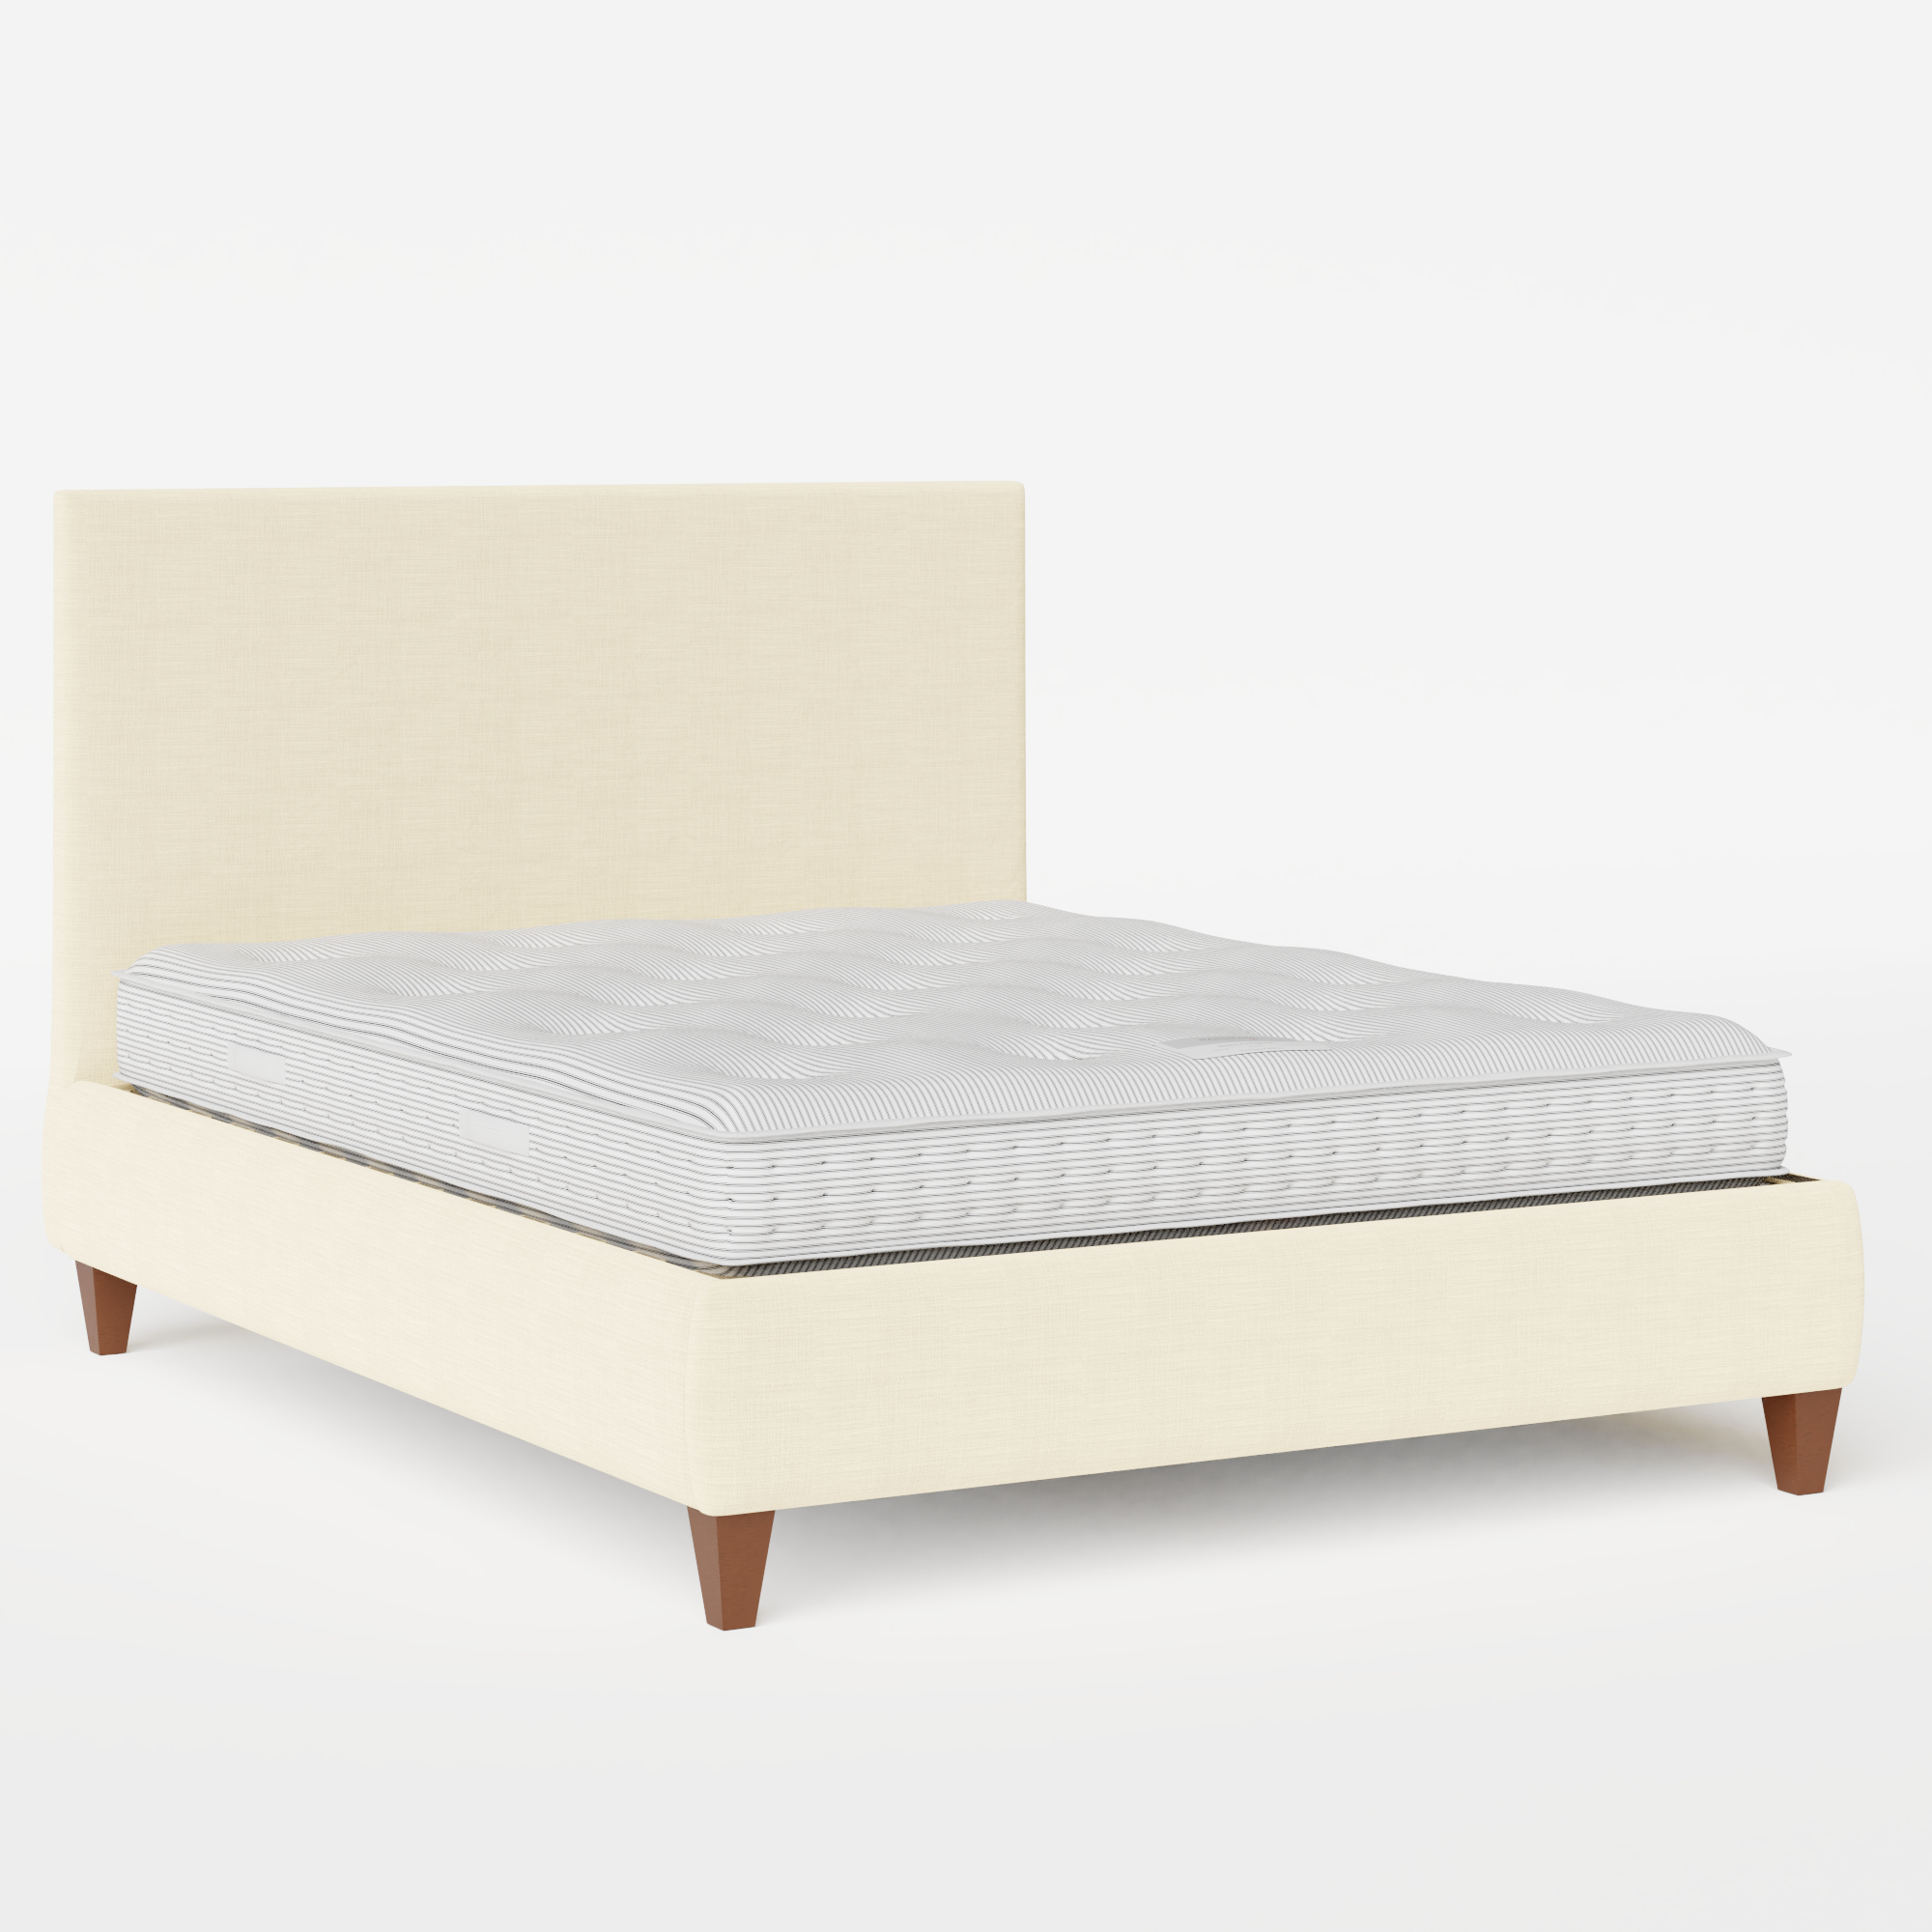 Yushan upholstered bed in natural fabric